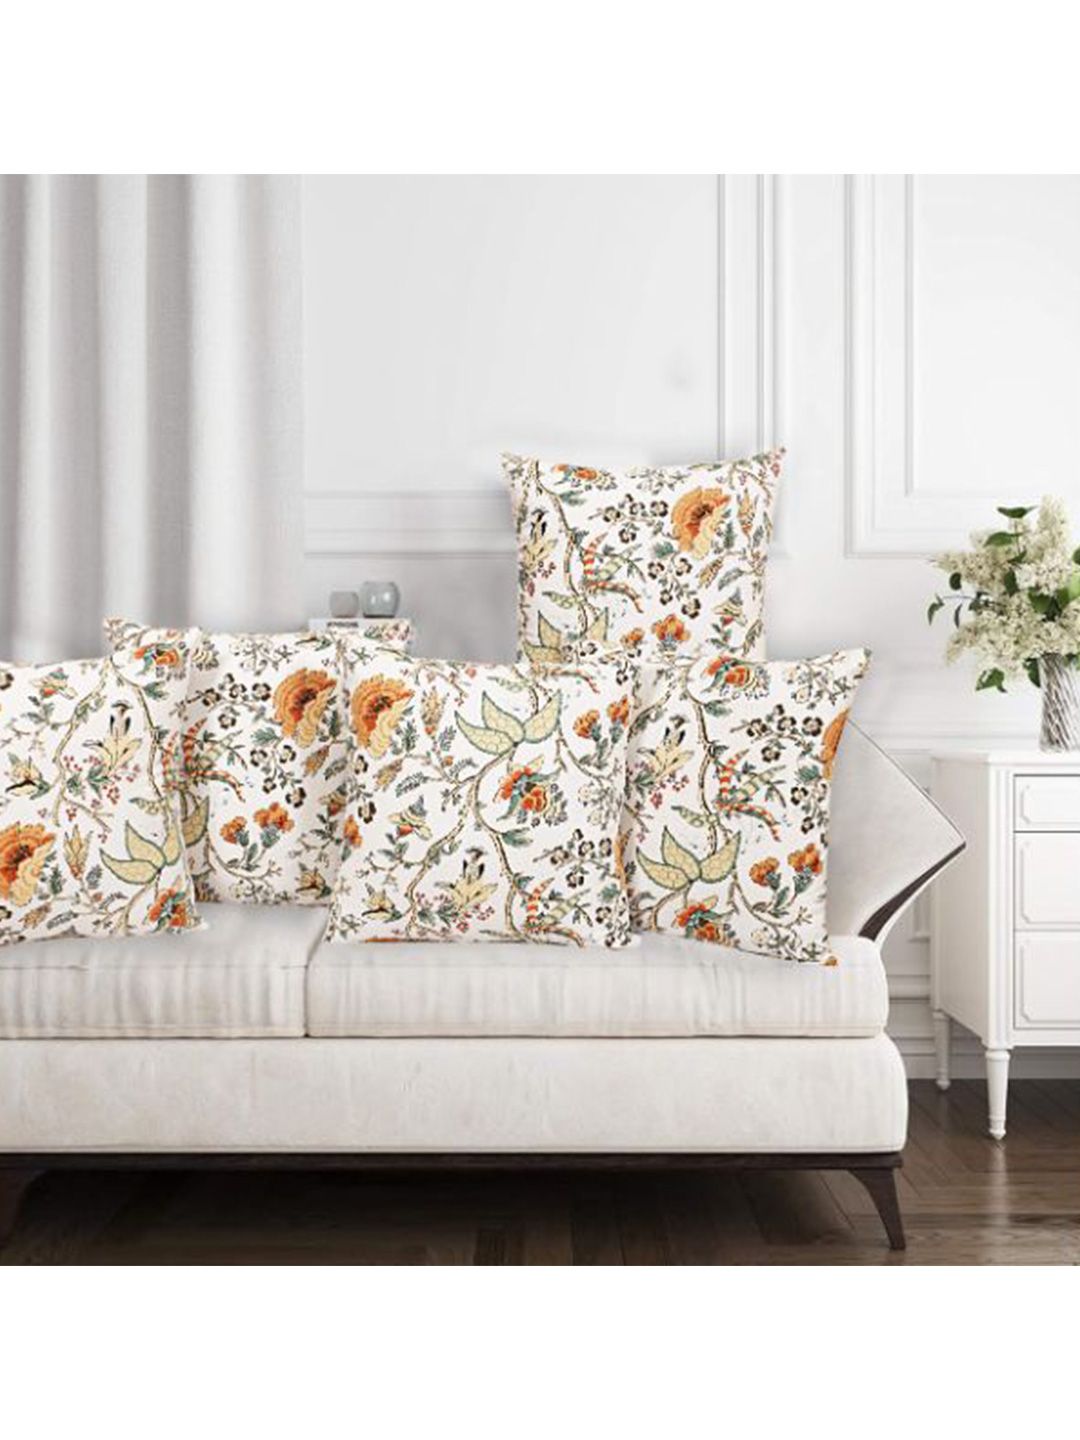 INDHOME LIFE Cream-Coloured & Orange Set of 5 Floral Square Cushion Covers Price in India